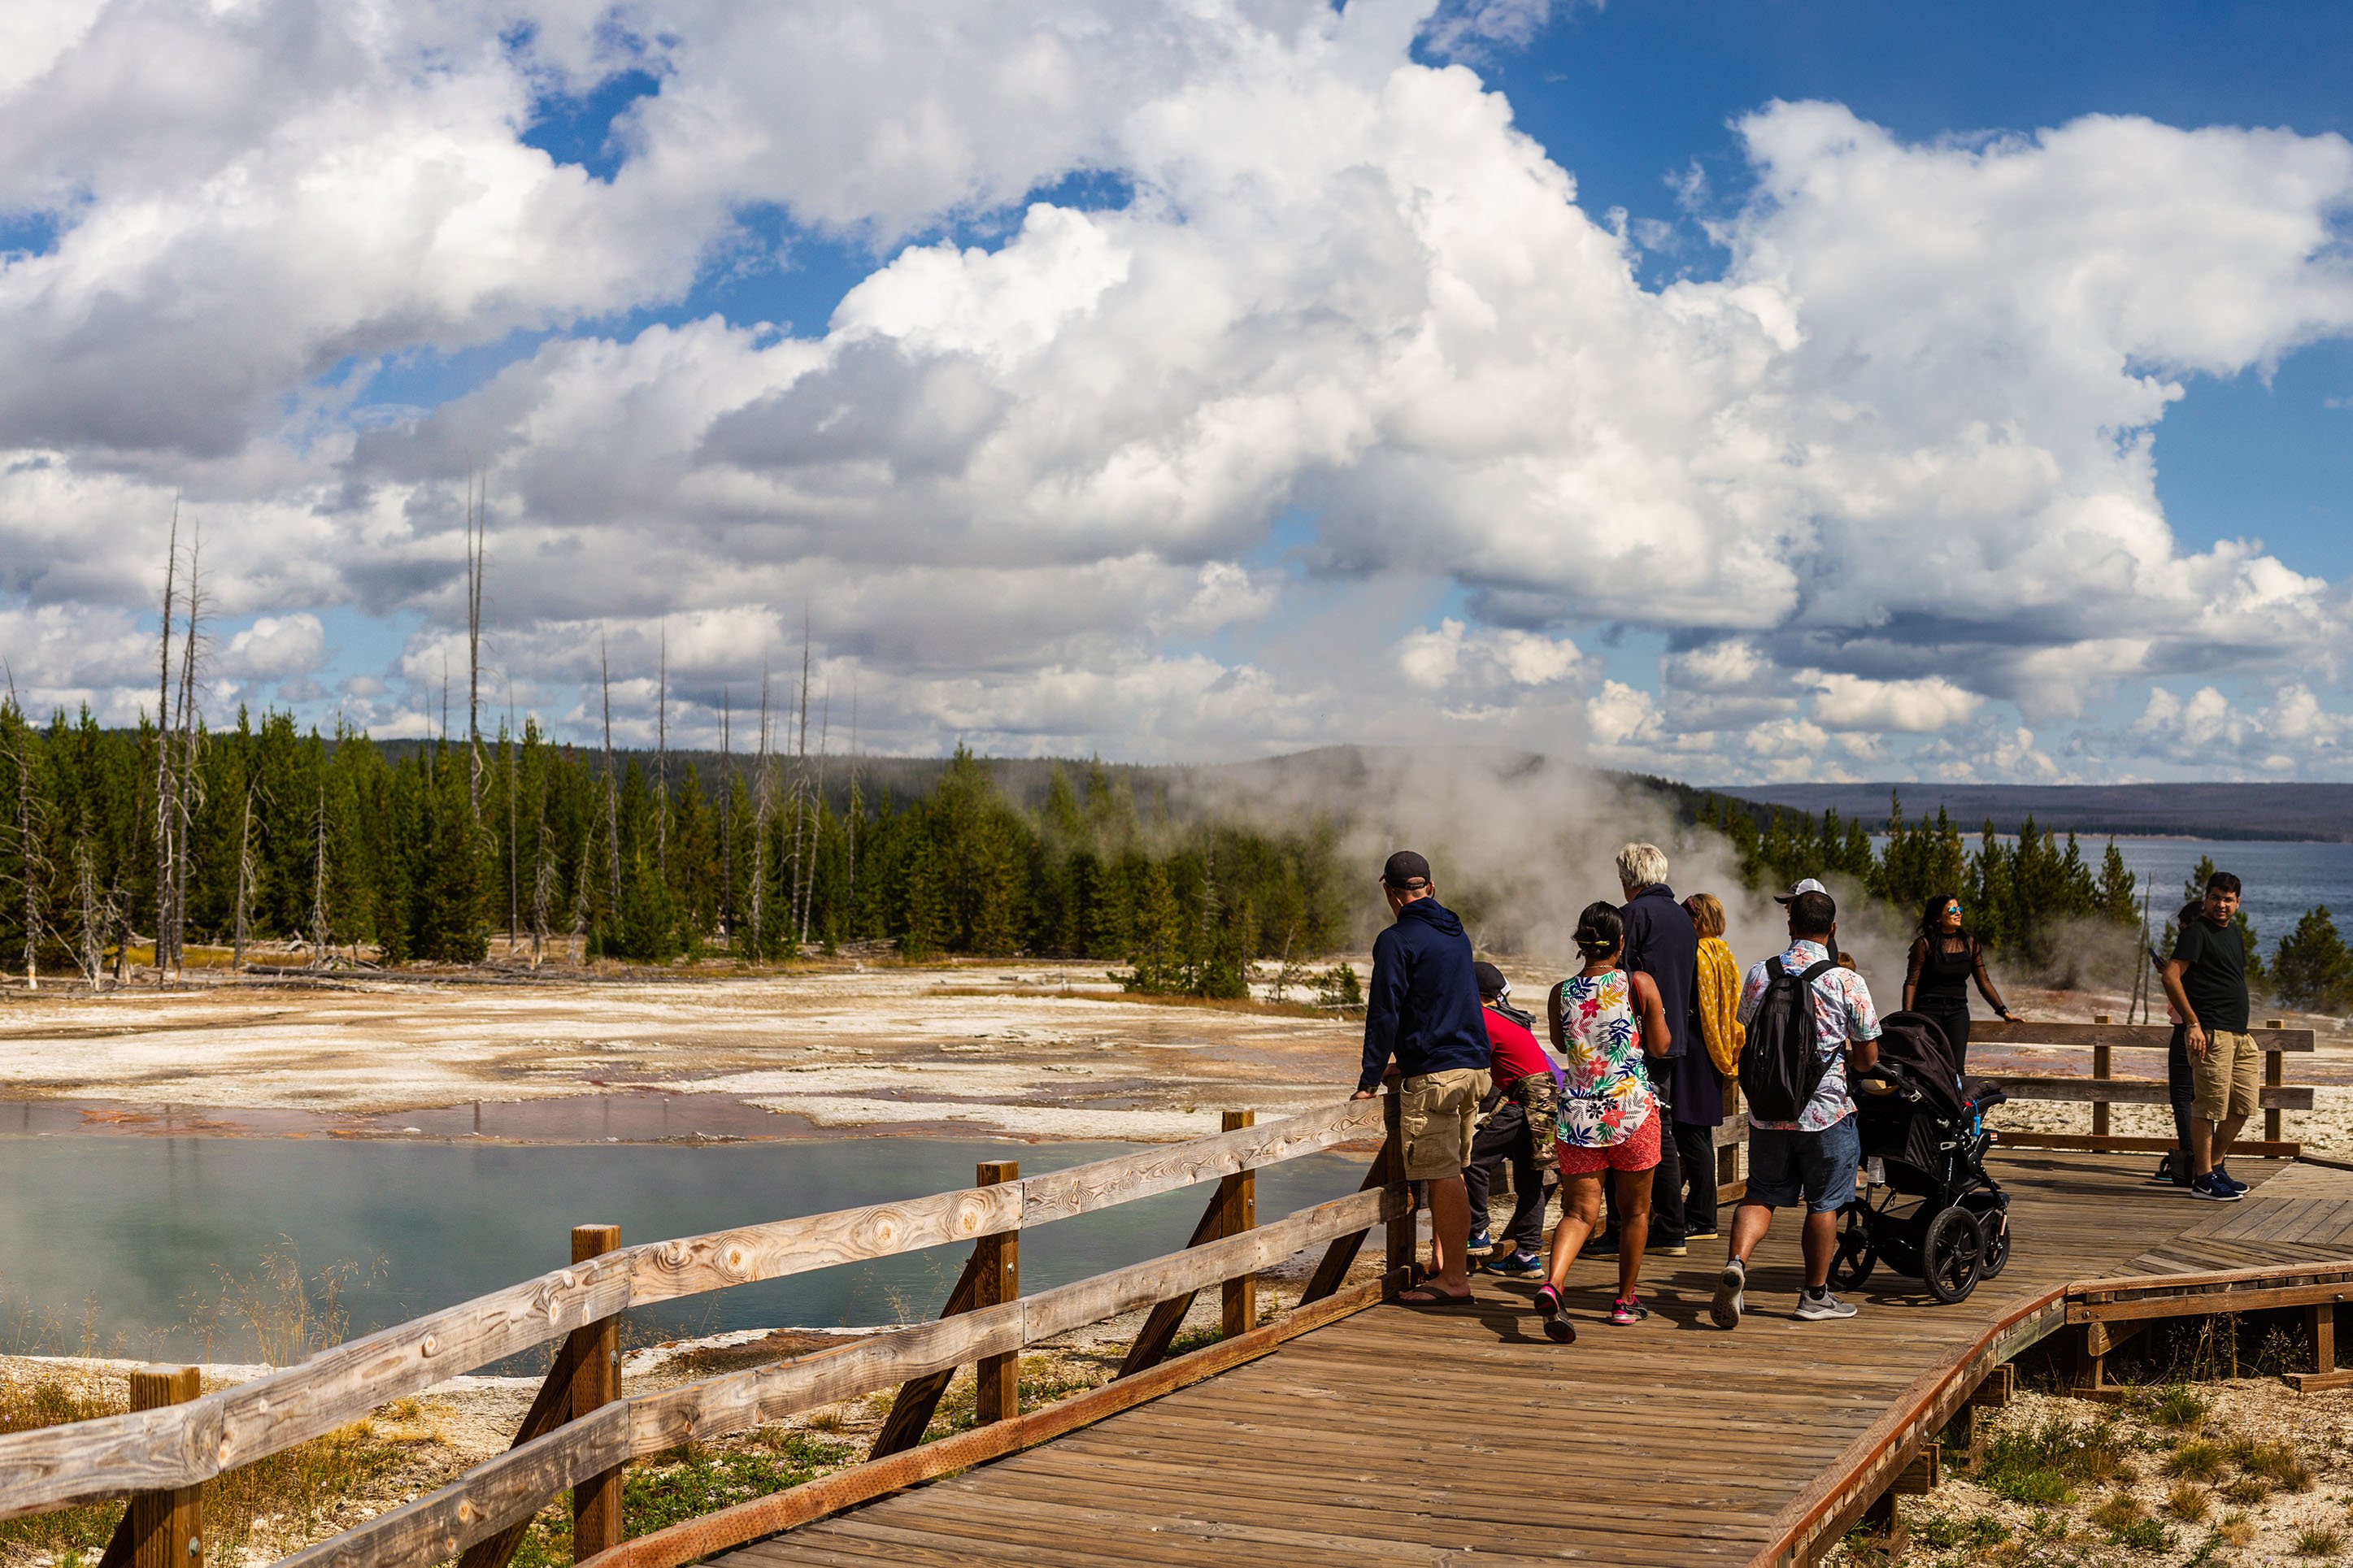 Exploring hot pots on the boardwalks in Yellowstone. 